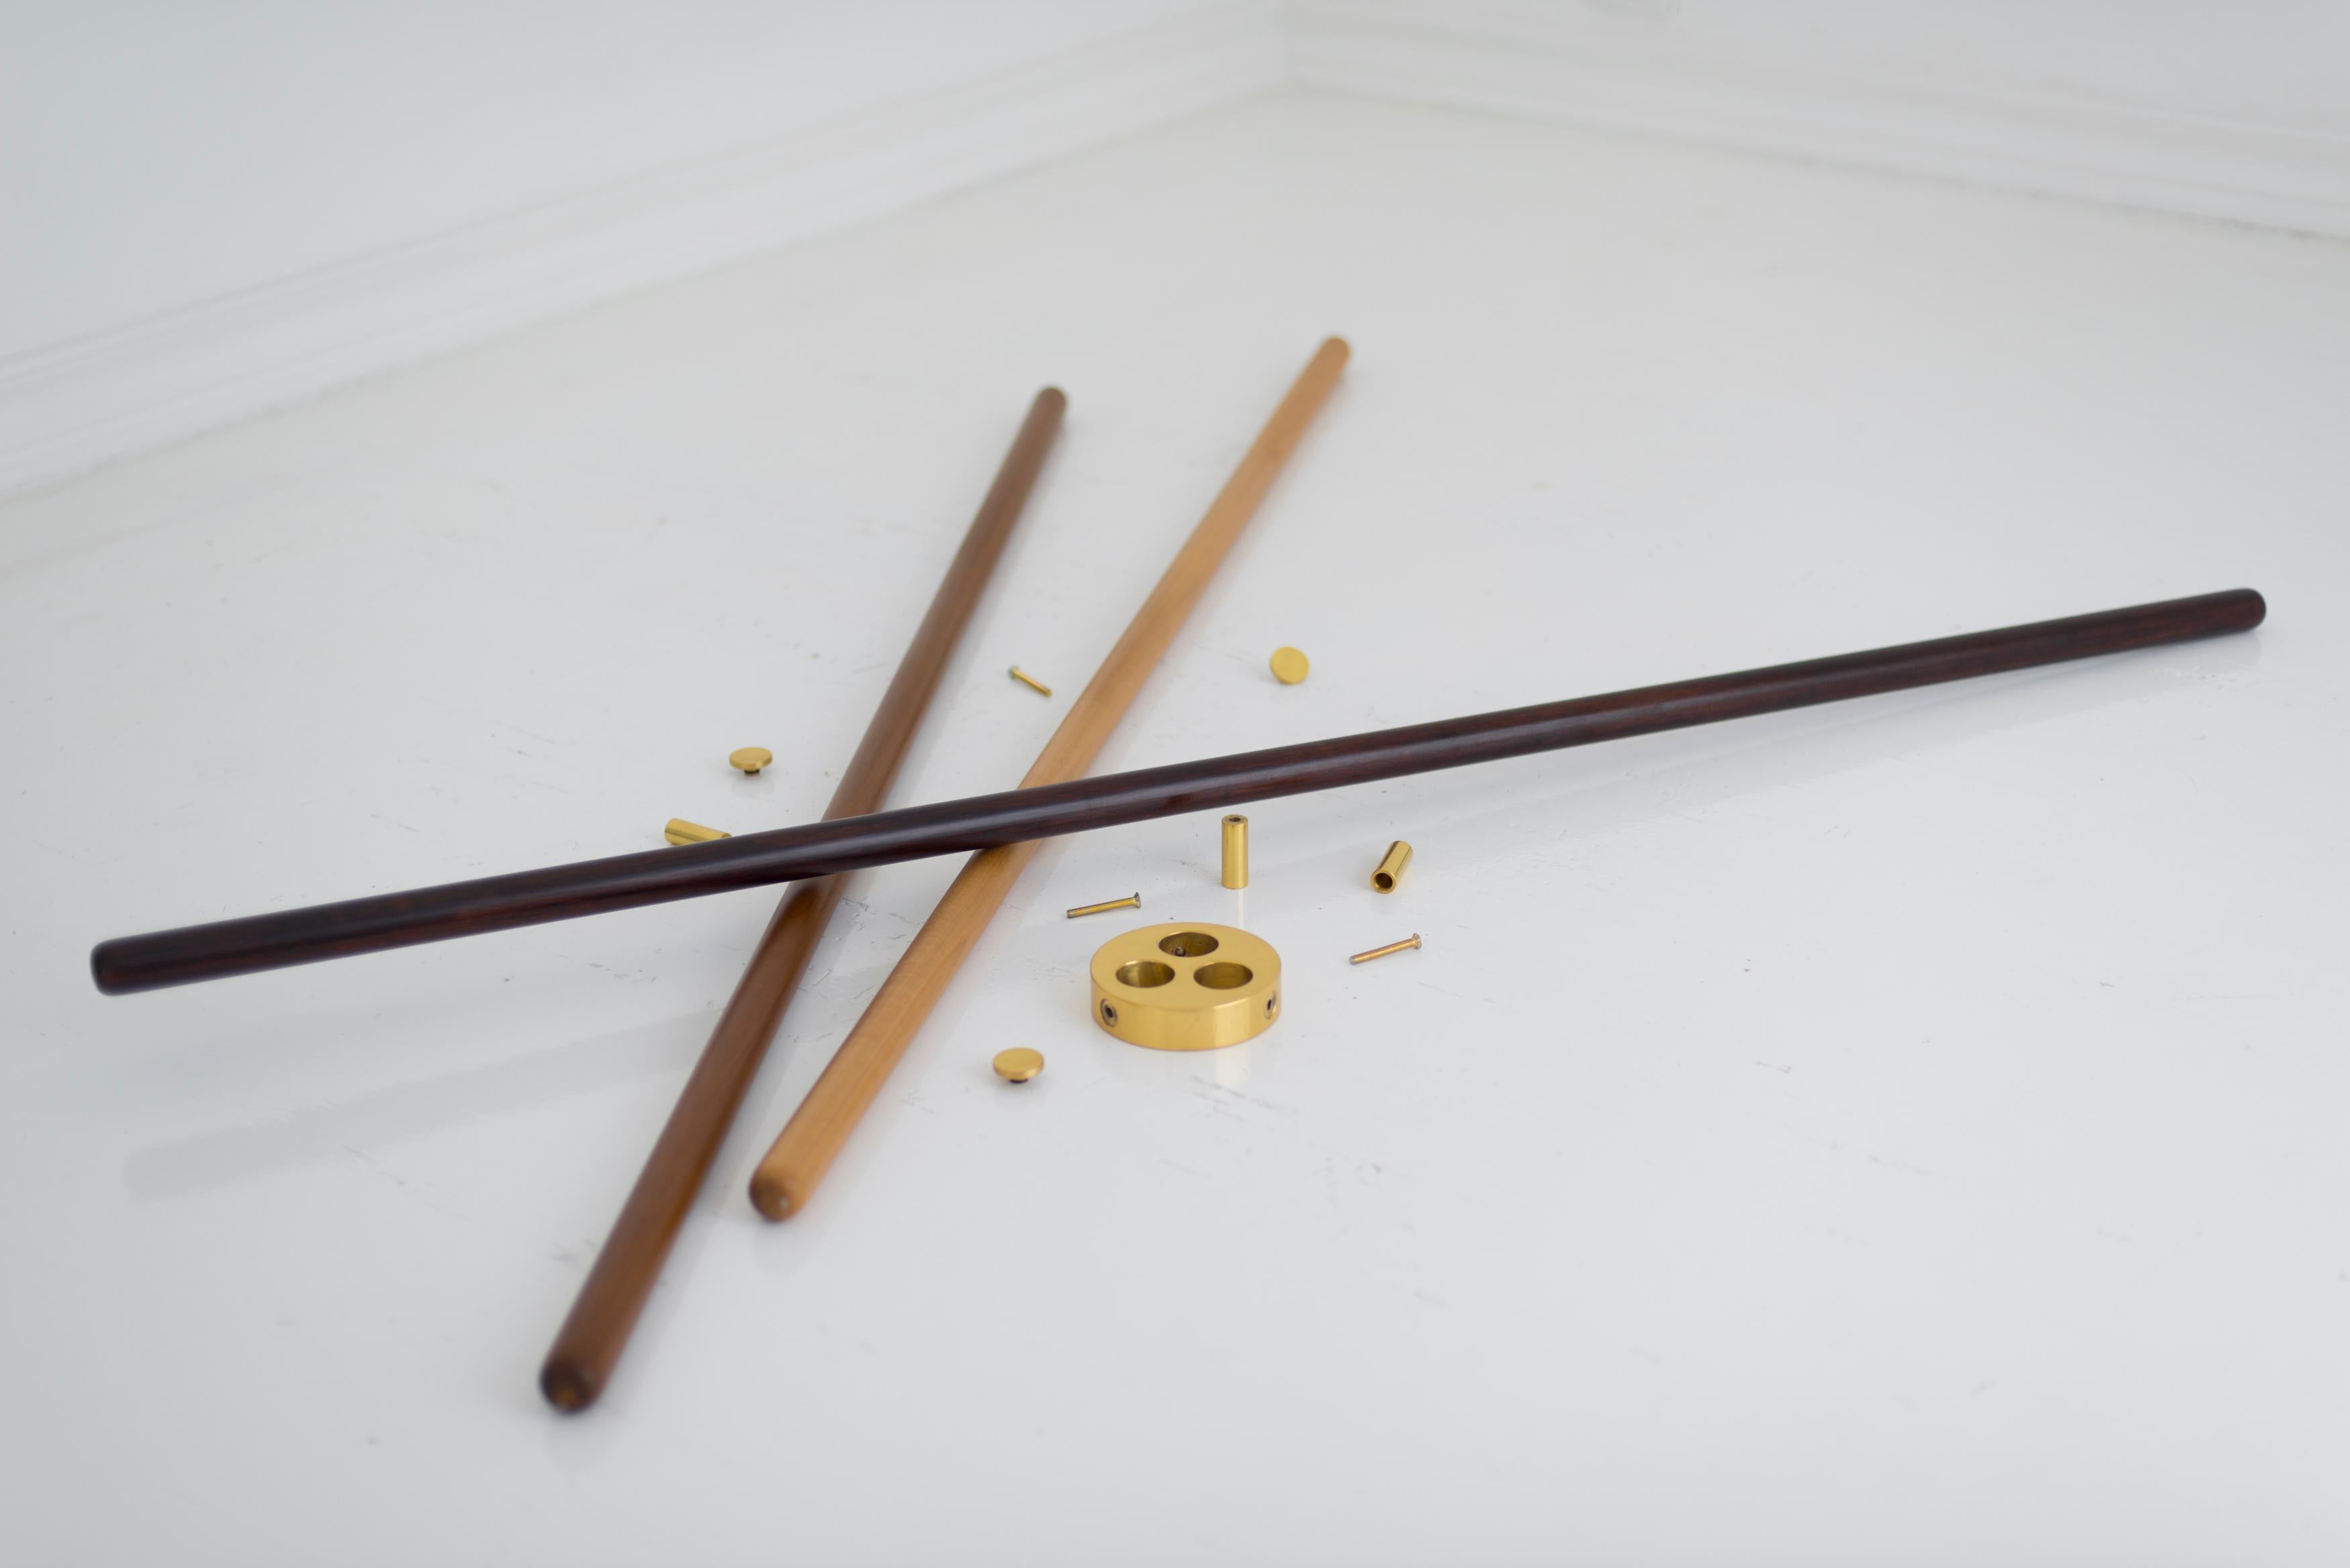 Brass and wood sculpted stool - Leandro Garcia 
Turned wooden rods (light, medium and dark colors) with polished brass disk and pin hangers
Dimensions: 165 x 50 x 50 cm

The Varetas (“Sticks”) coat Stand consists of three different turned wooden